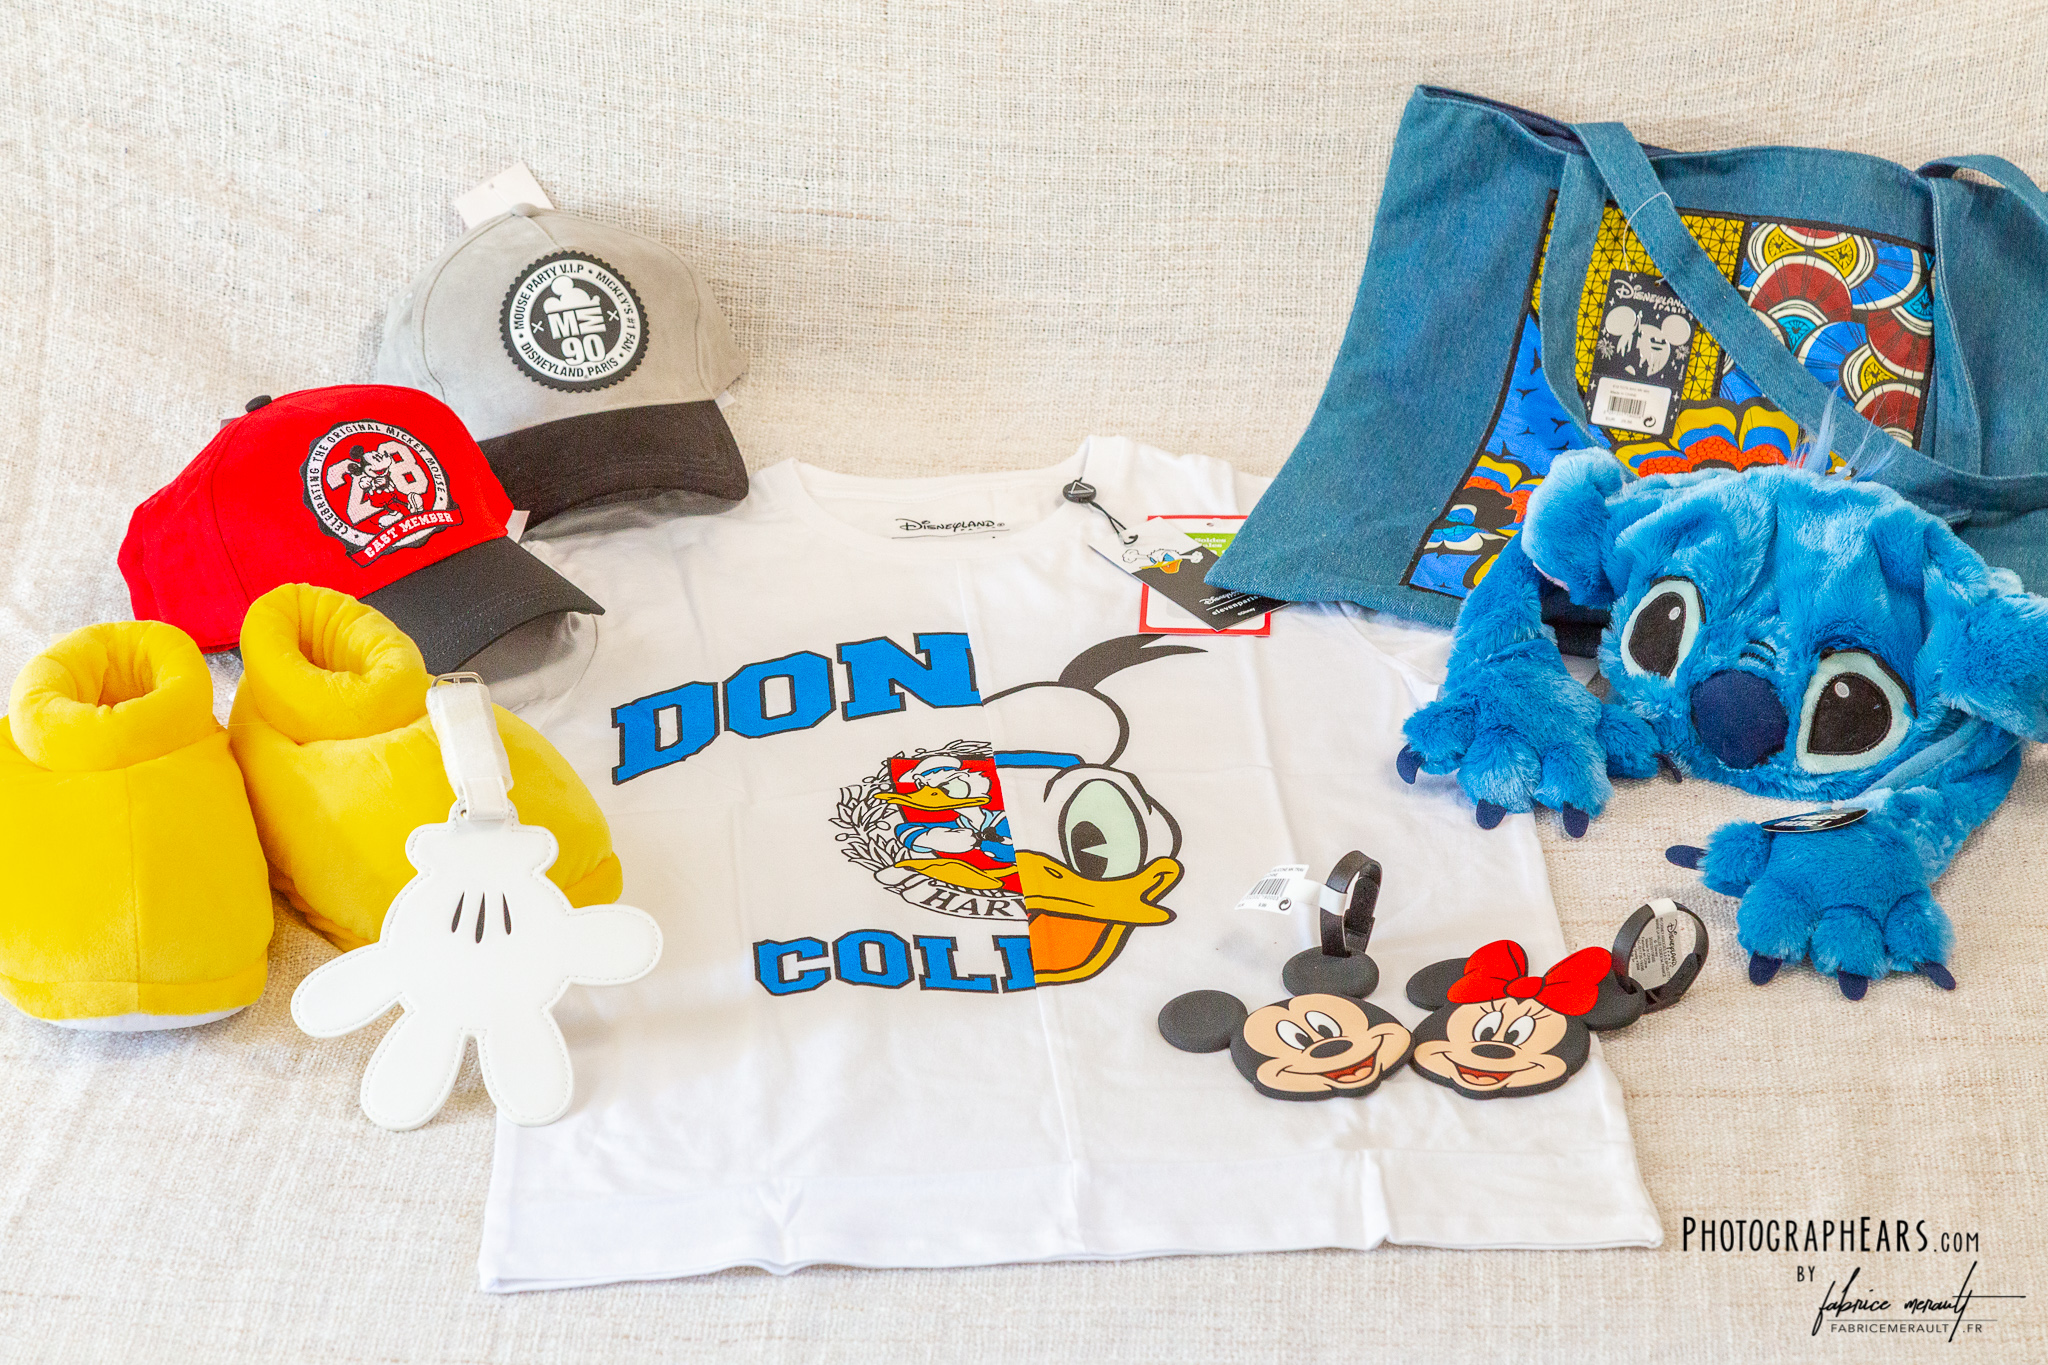 Haul — Braderie Cast Member #3 ... tee-shirts, casquettes, chaussons Mickey, bonnet Stitch, ...